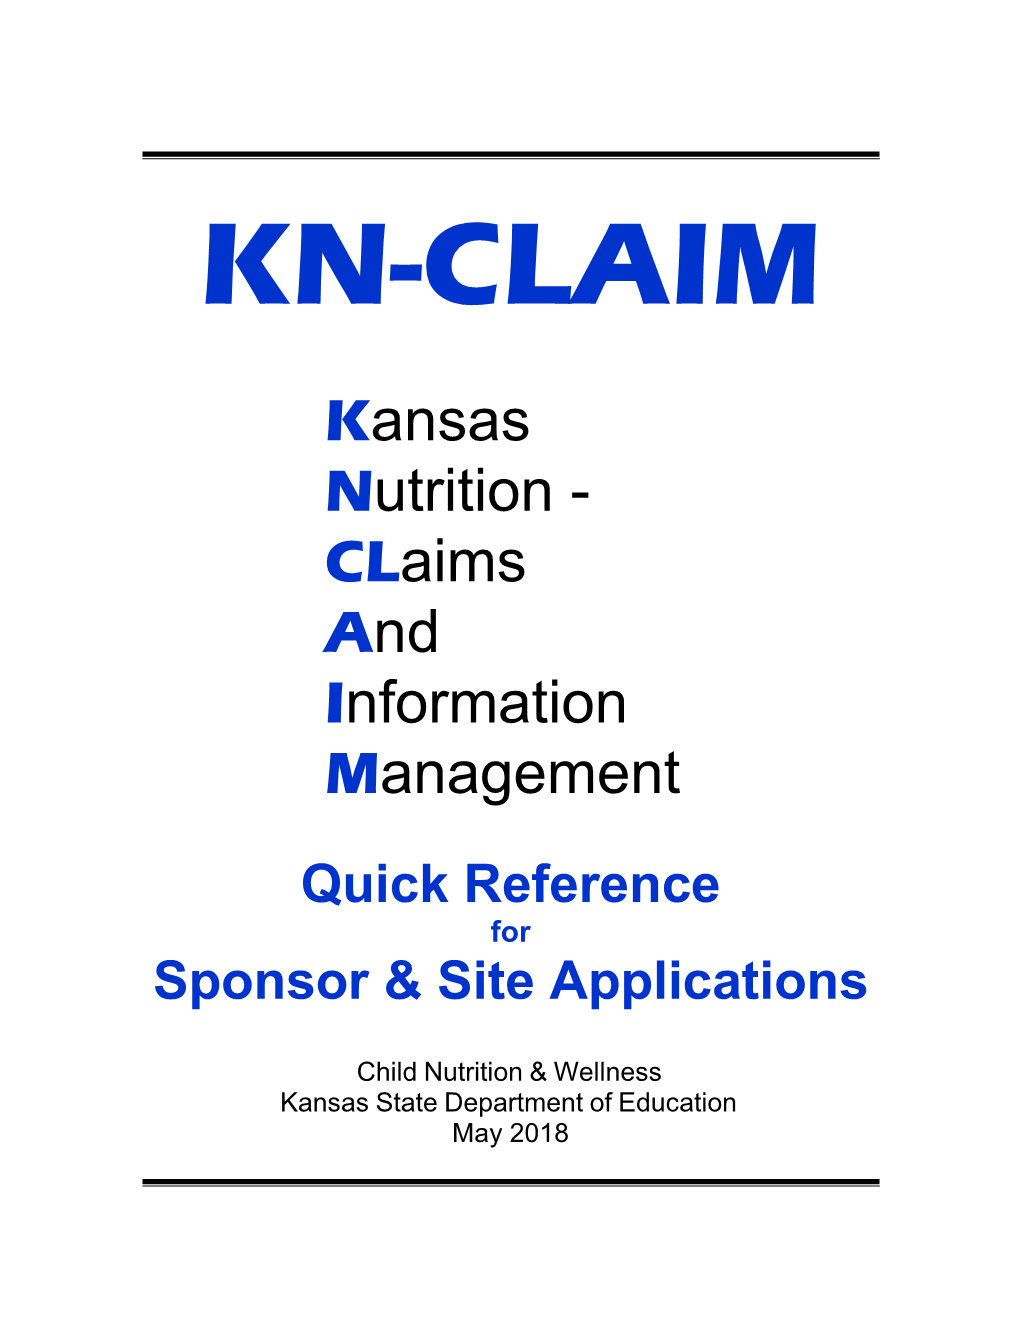 KN-CLAIM SNP Sponsor and Site Applications